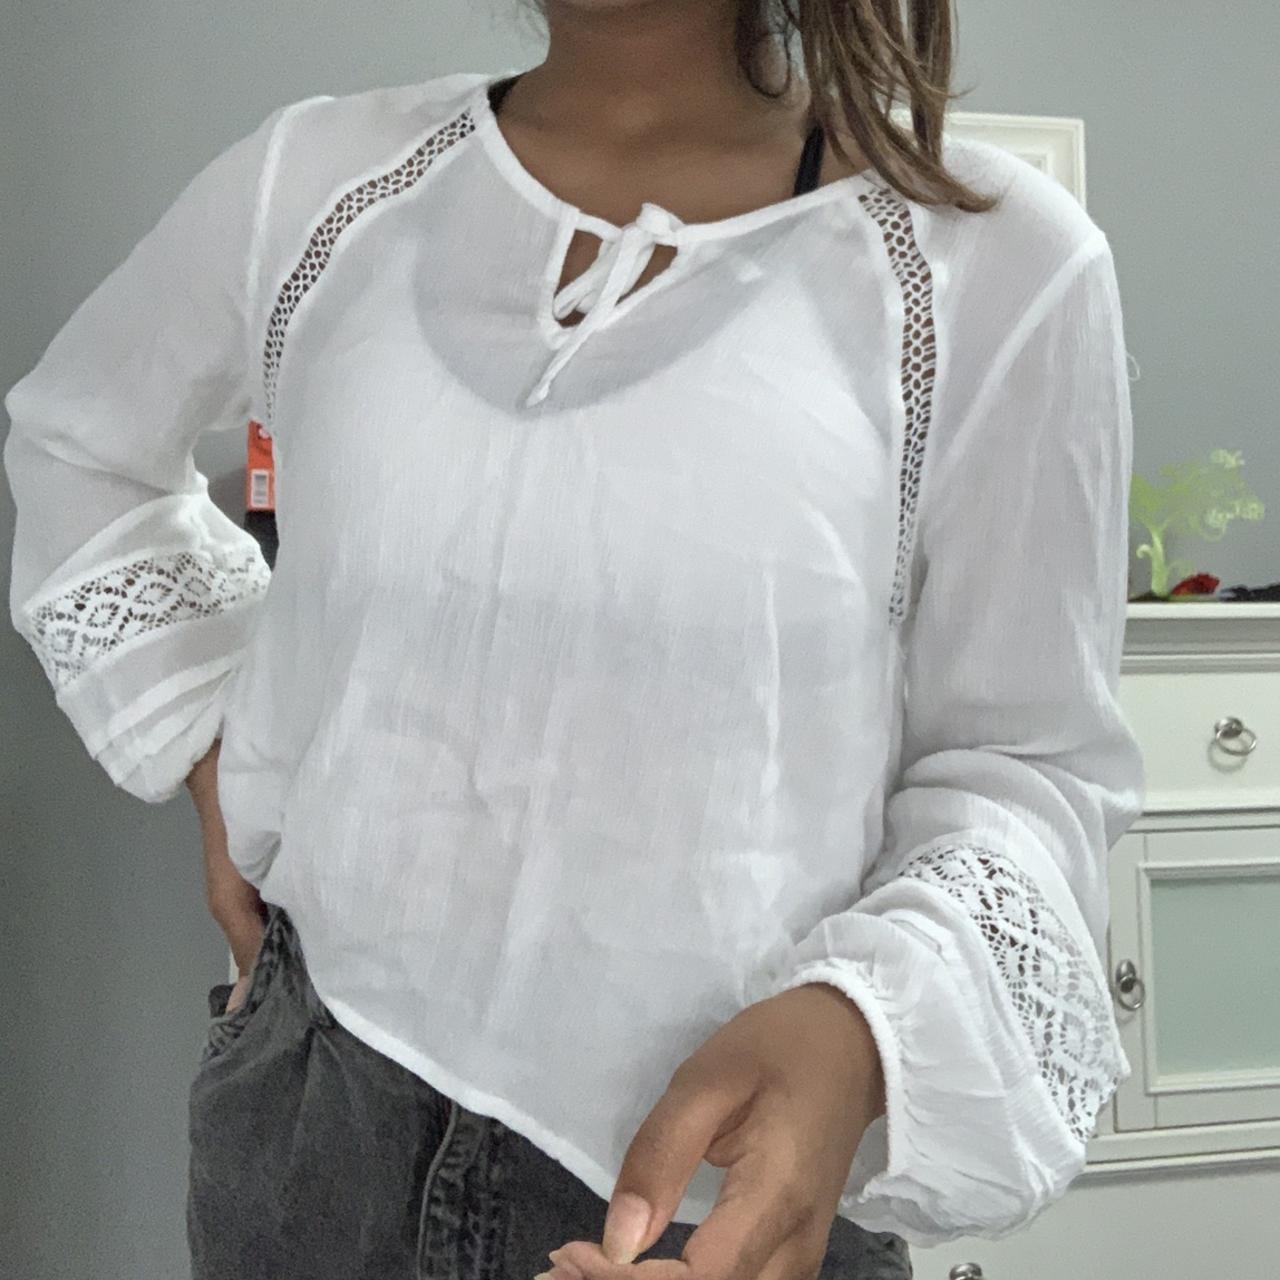 Hollister Women's White Lace & Sheer Long Sleeve Top Size XS